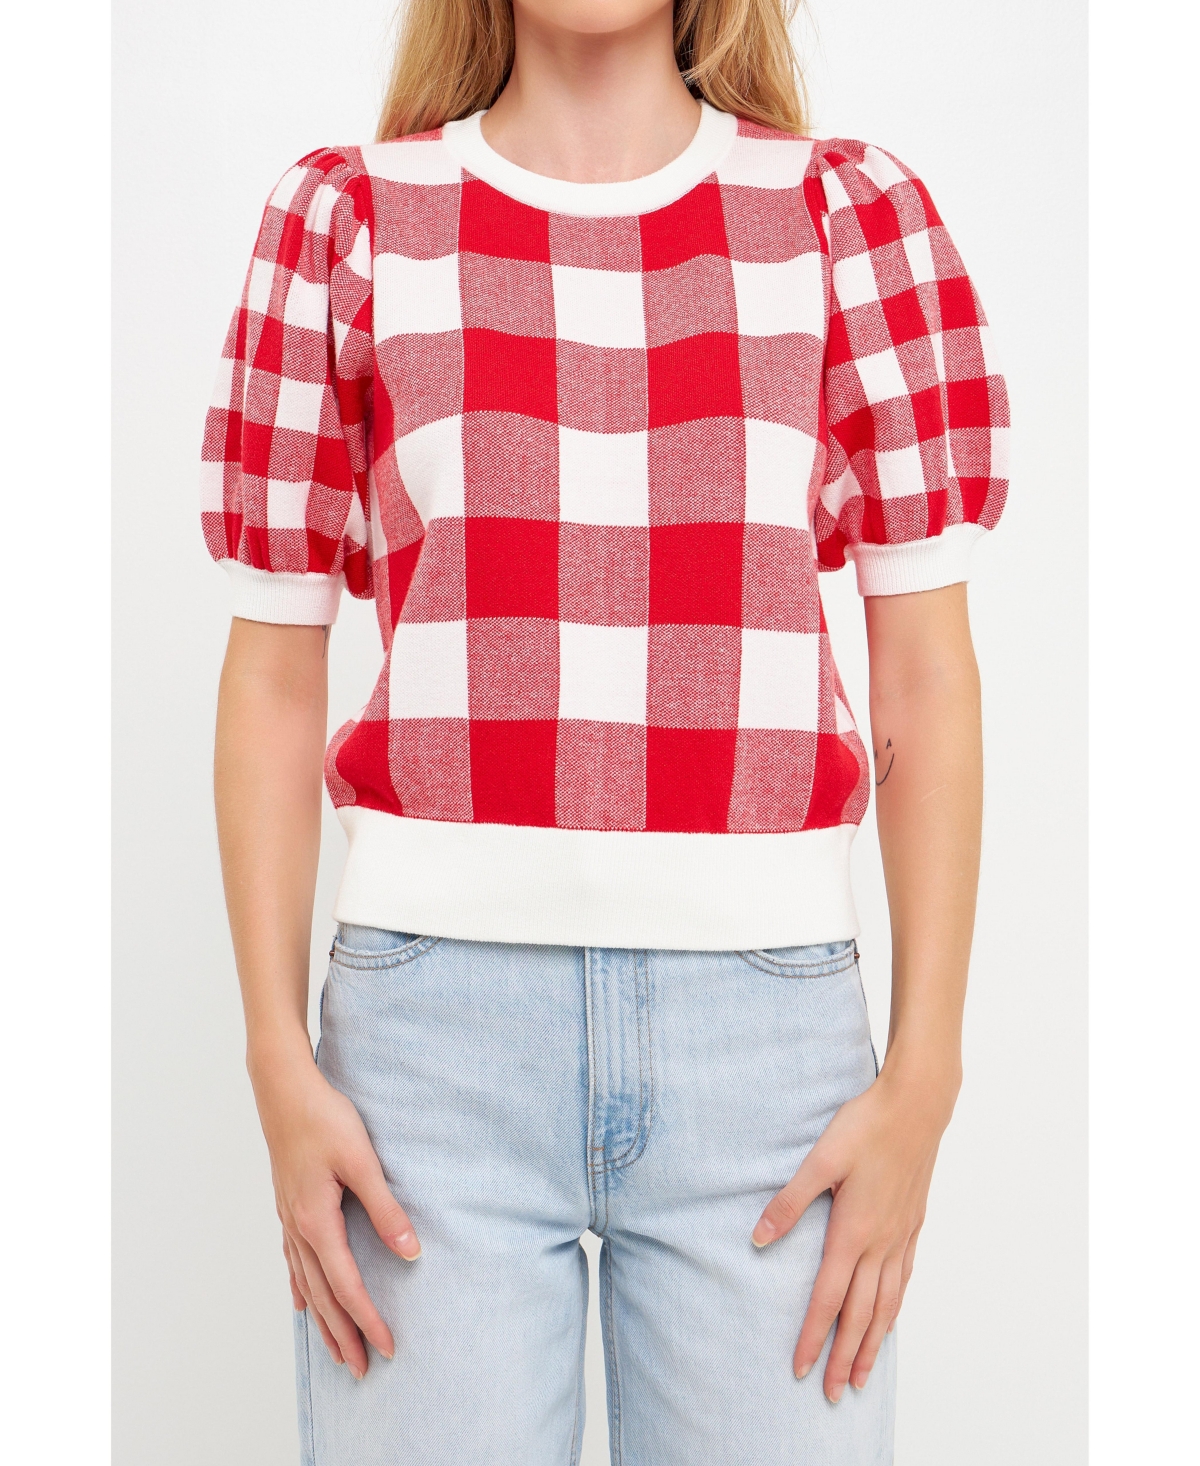 ENGLISH FACTORY WOMEN'S GINGHAM PUFF SLEEVE KNIT TOP